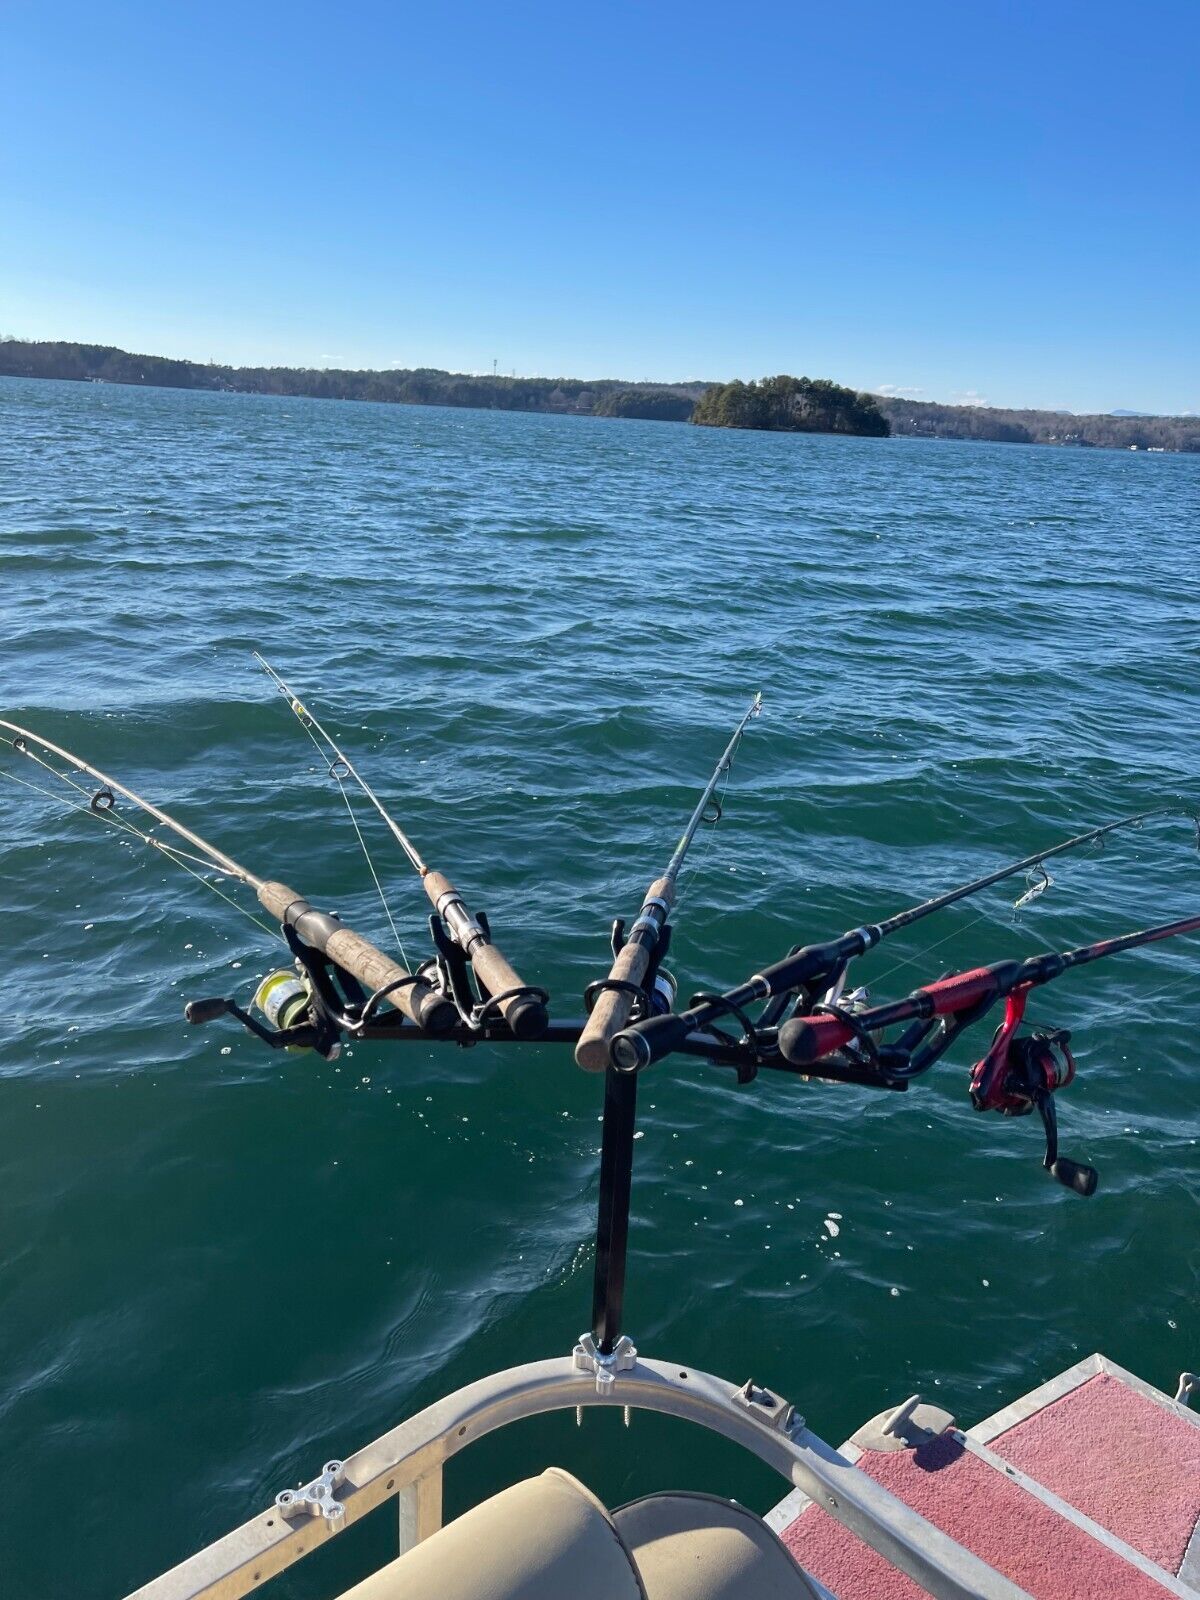 Kayak Fishing Rod Holders: How to Choose the Best for Your Needs